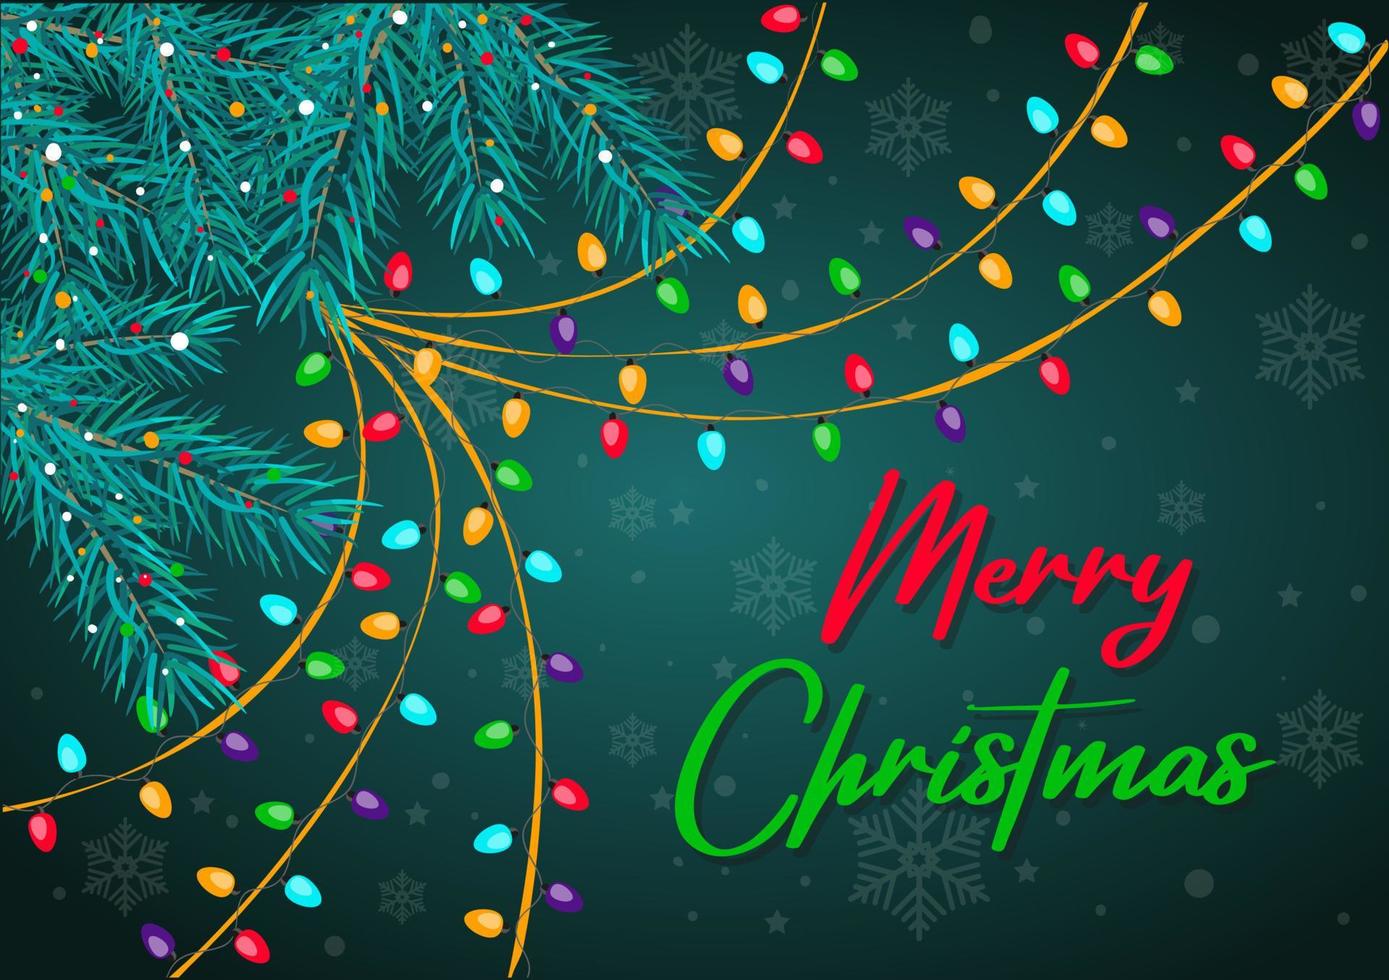 Christmas background with Christmas tree branches Christmas lights and snowflakes vector